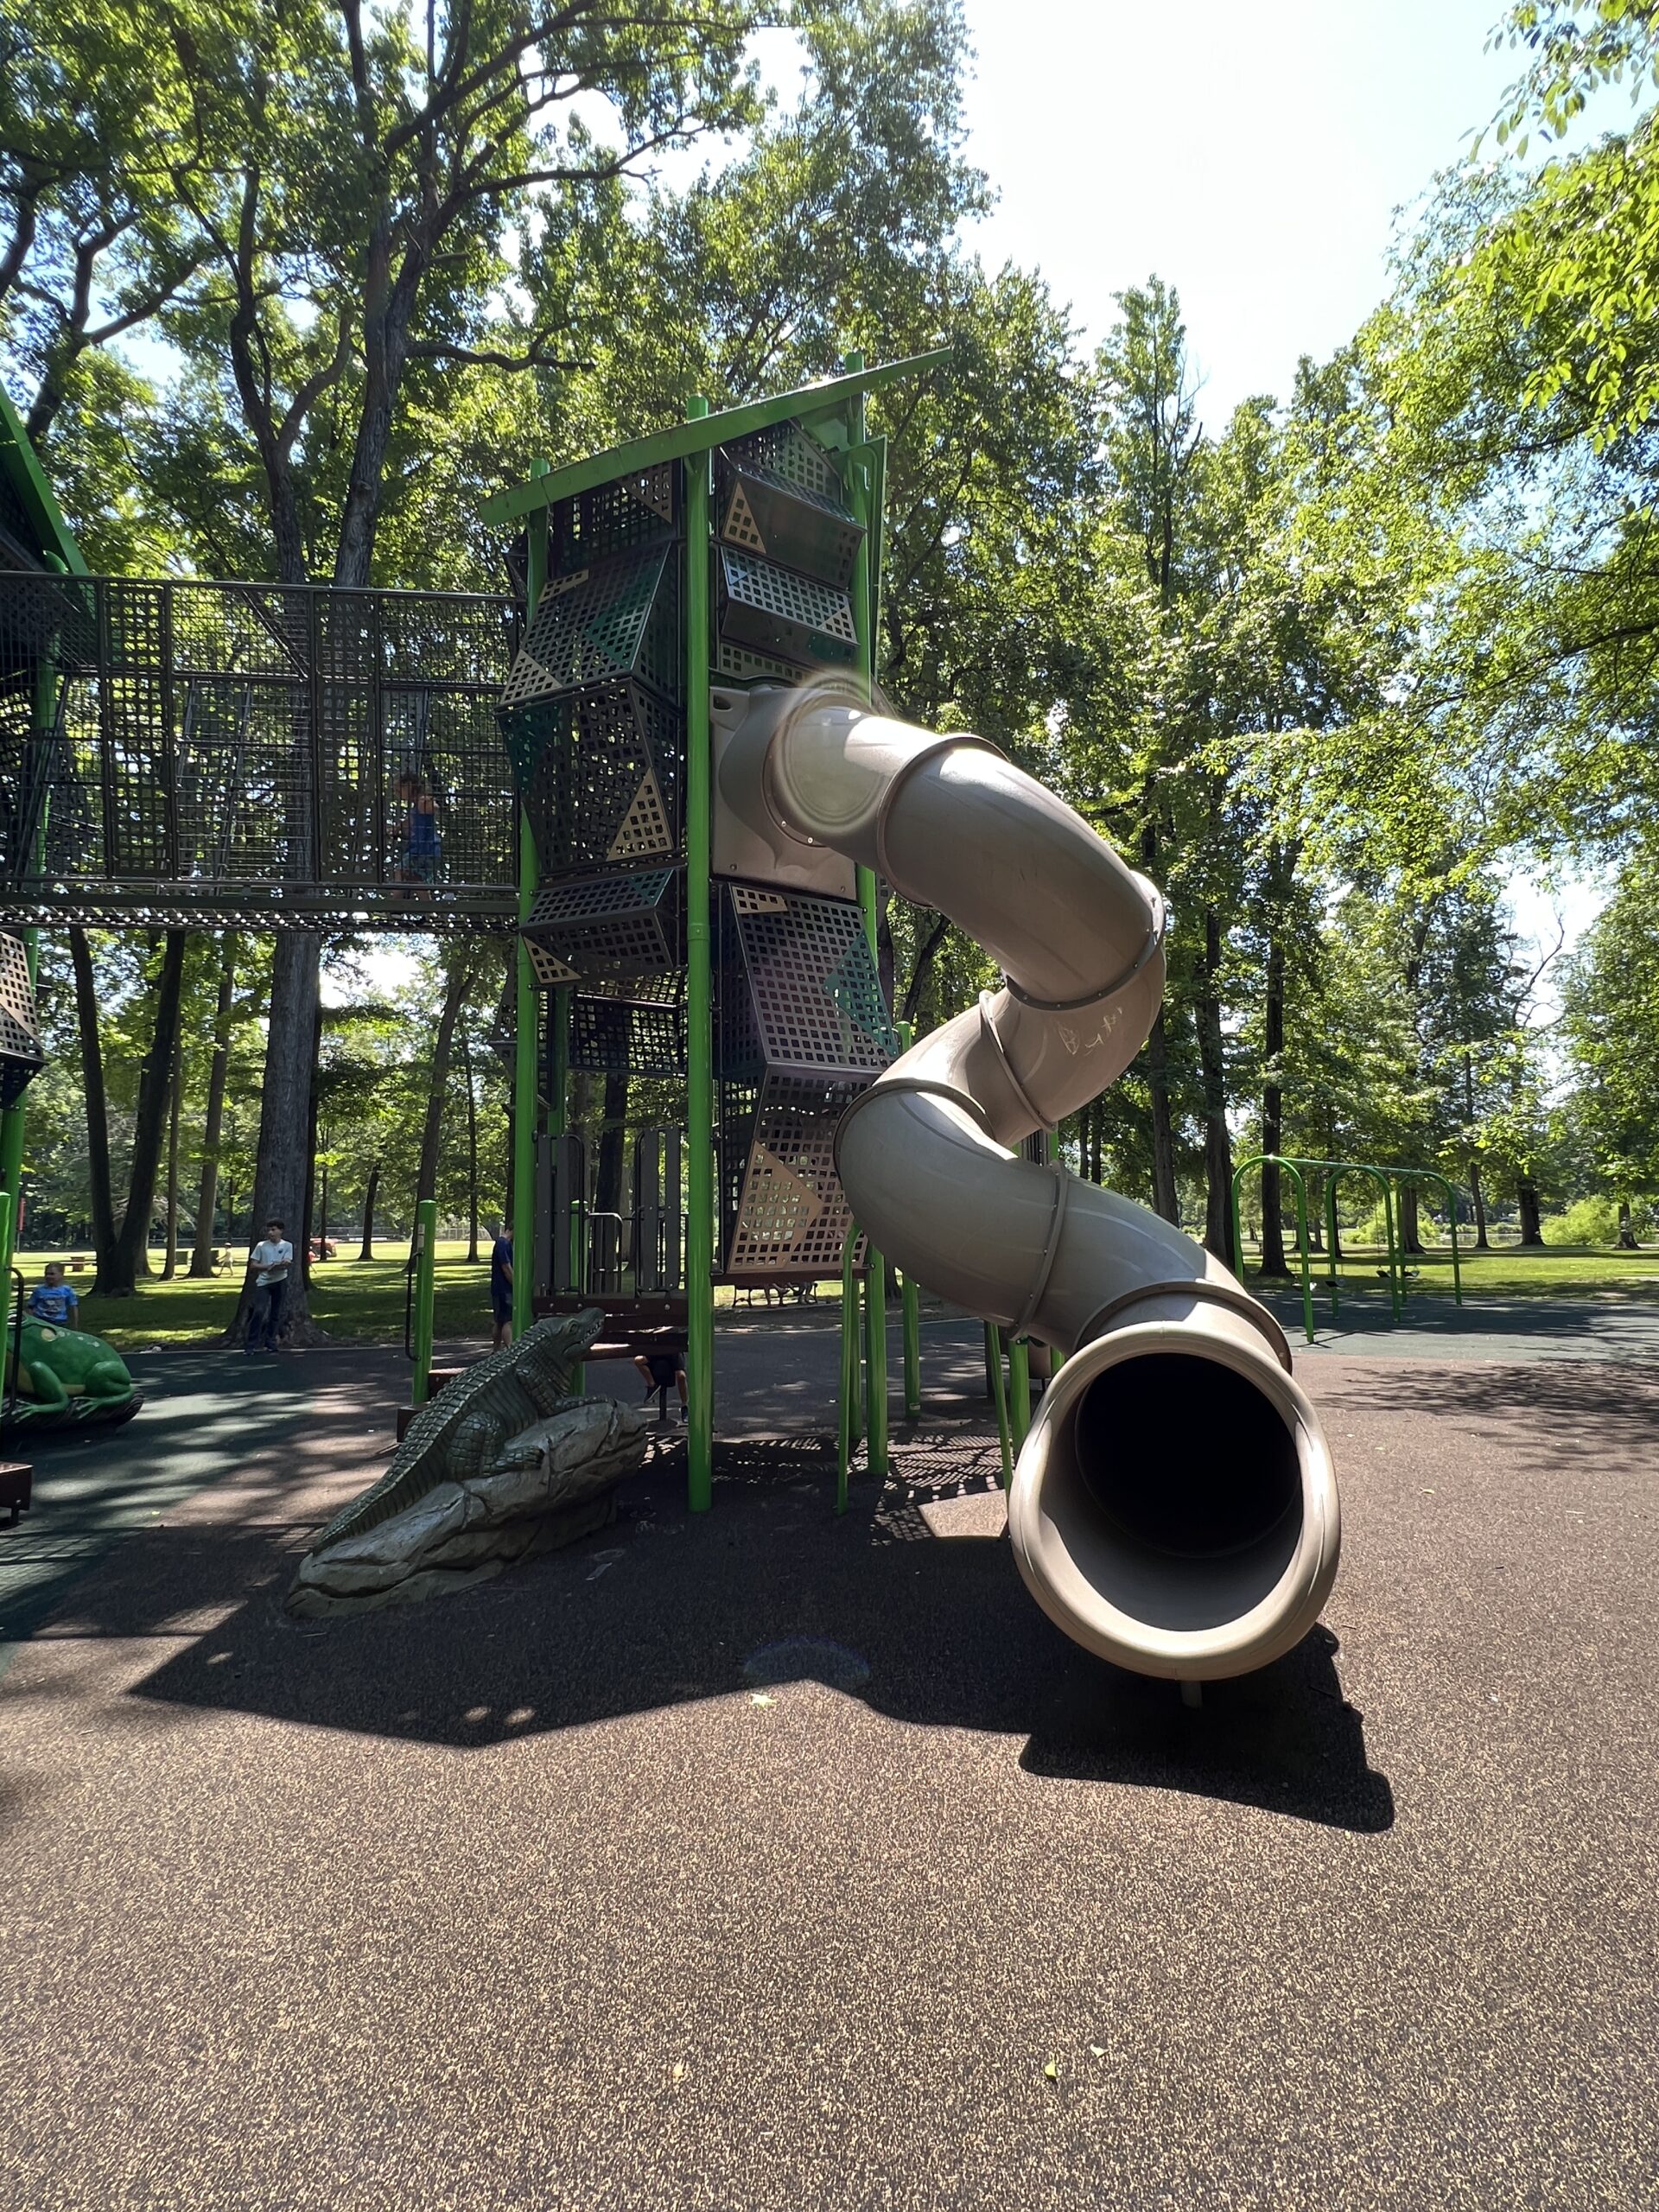 Nomahegan Park Playground in Cranford NJ - Large structure - SLIDE second tunnel twist slide with window TALL image